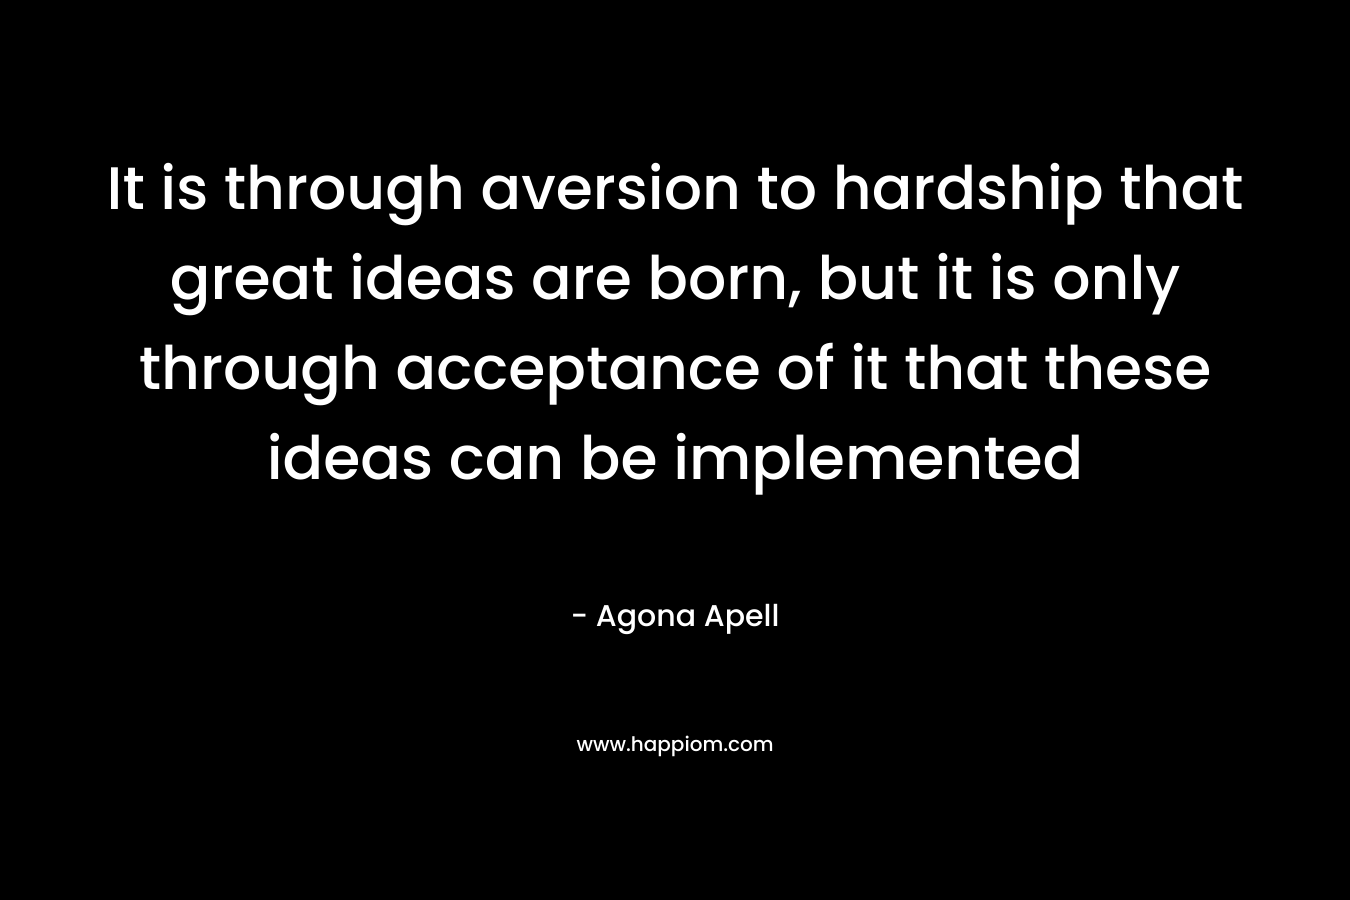 It is through aversion to hardship that great ideas are born, but it is only through acceptance of it that these ideas can be implemented – Agona Apell